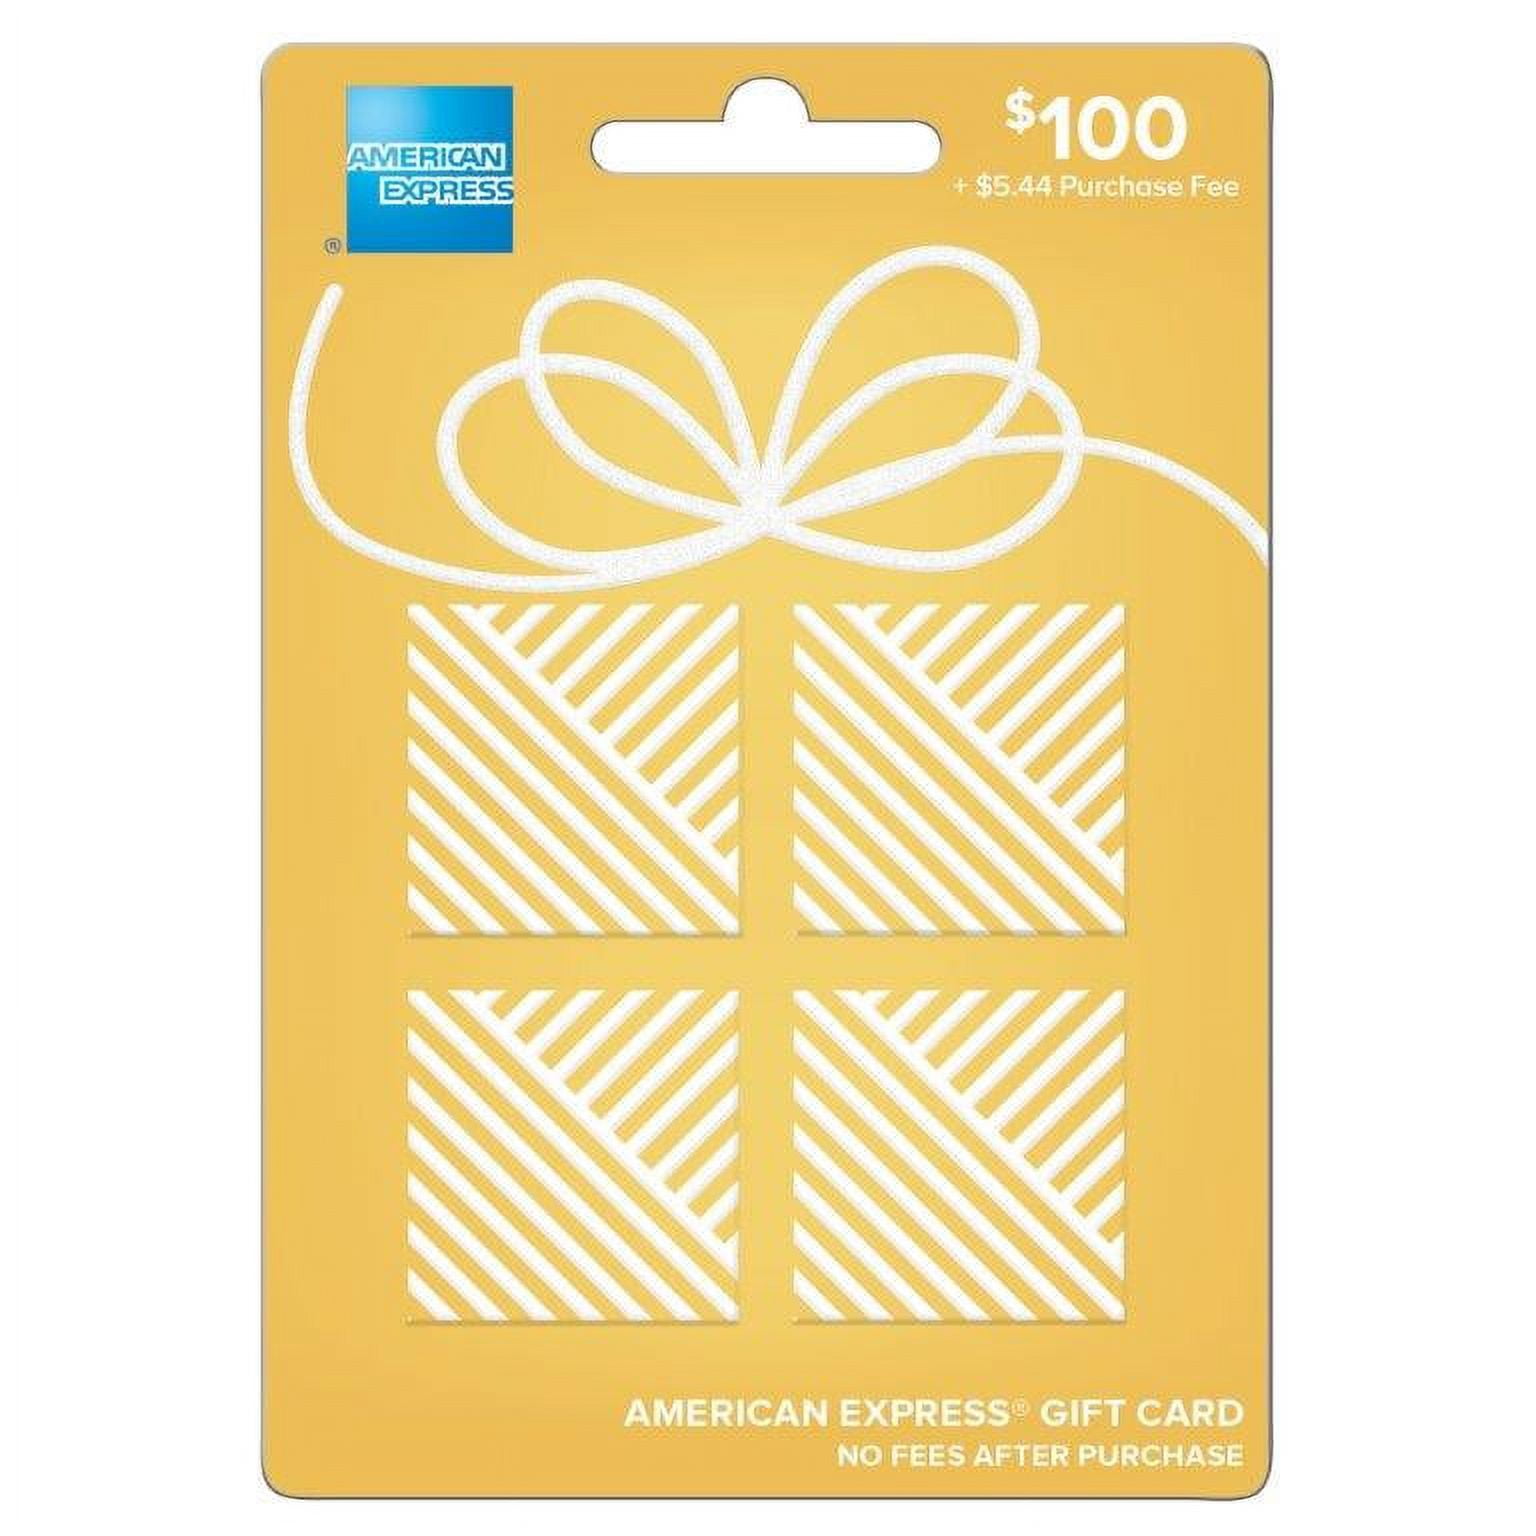 Something Special For You: Your $100 Apple Gift Card